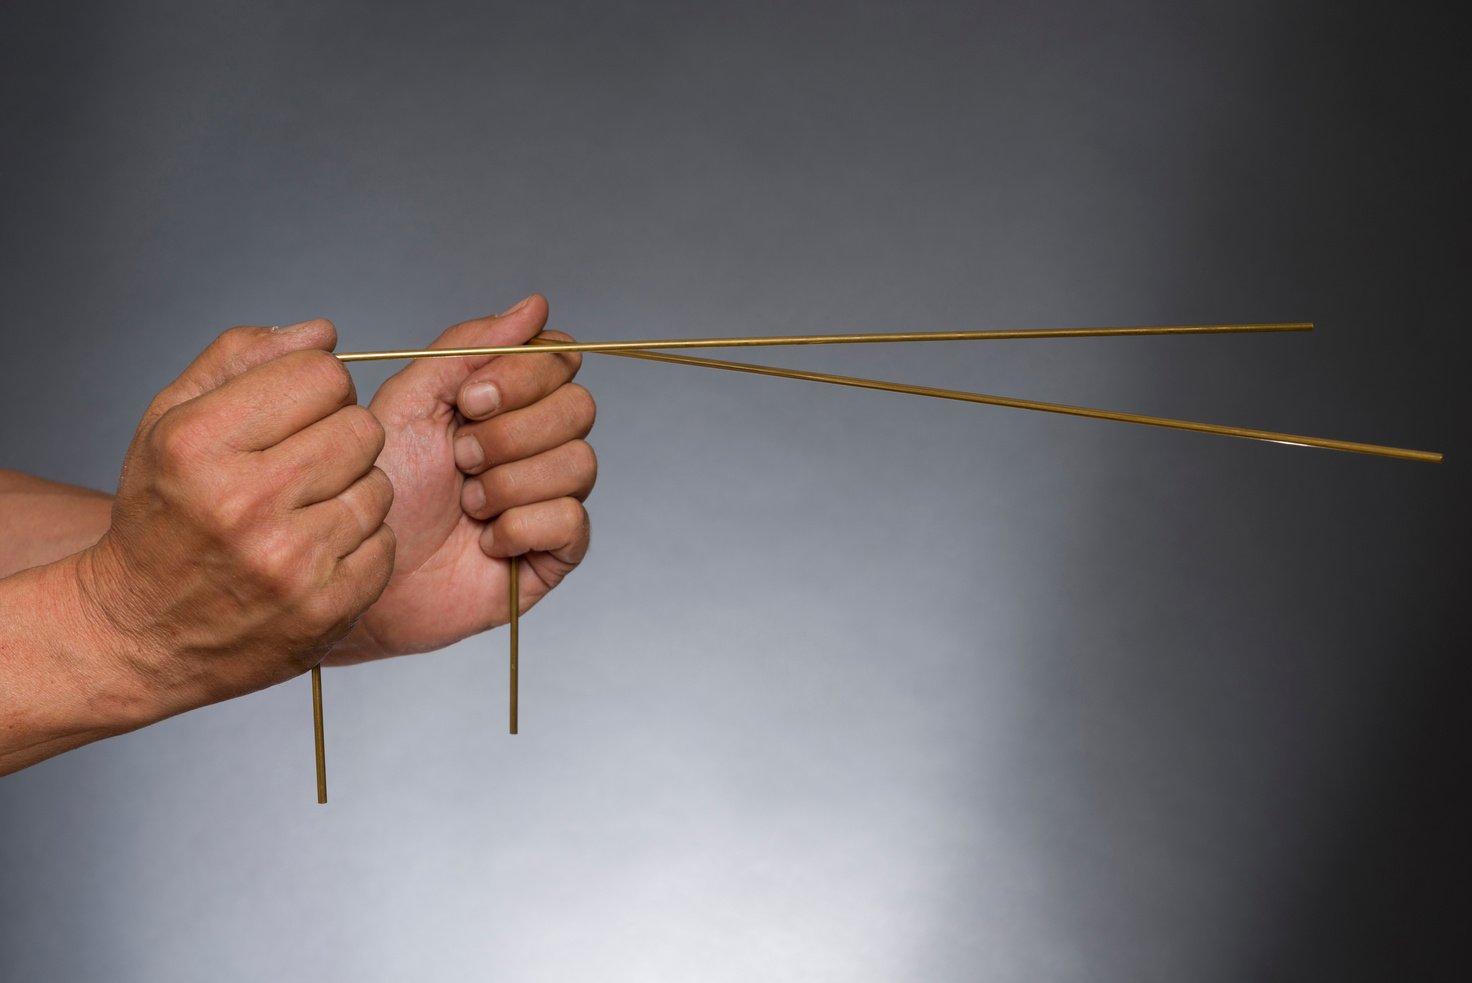 Man holding dowsing rods with both hands